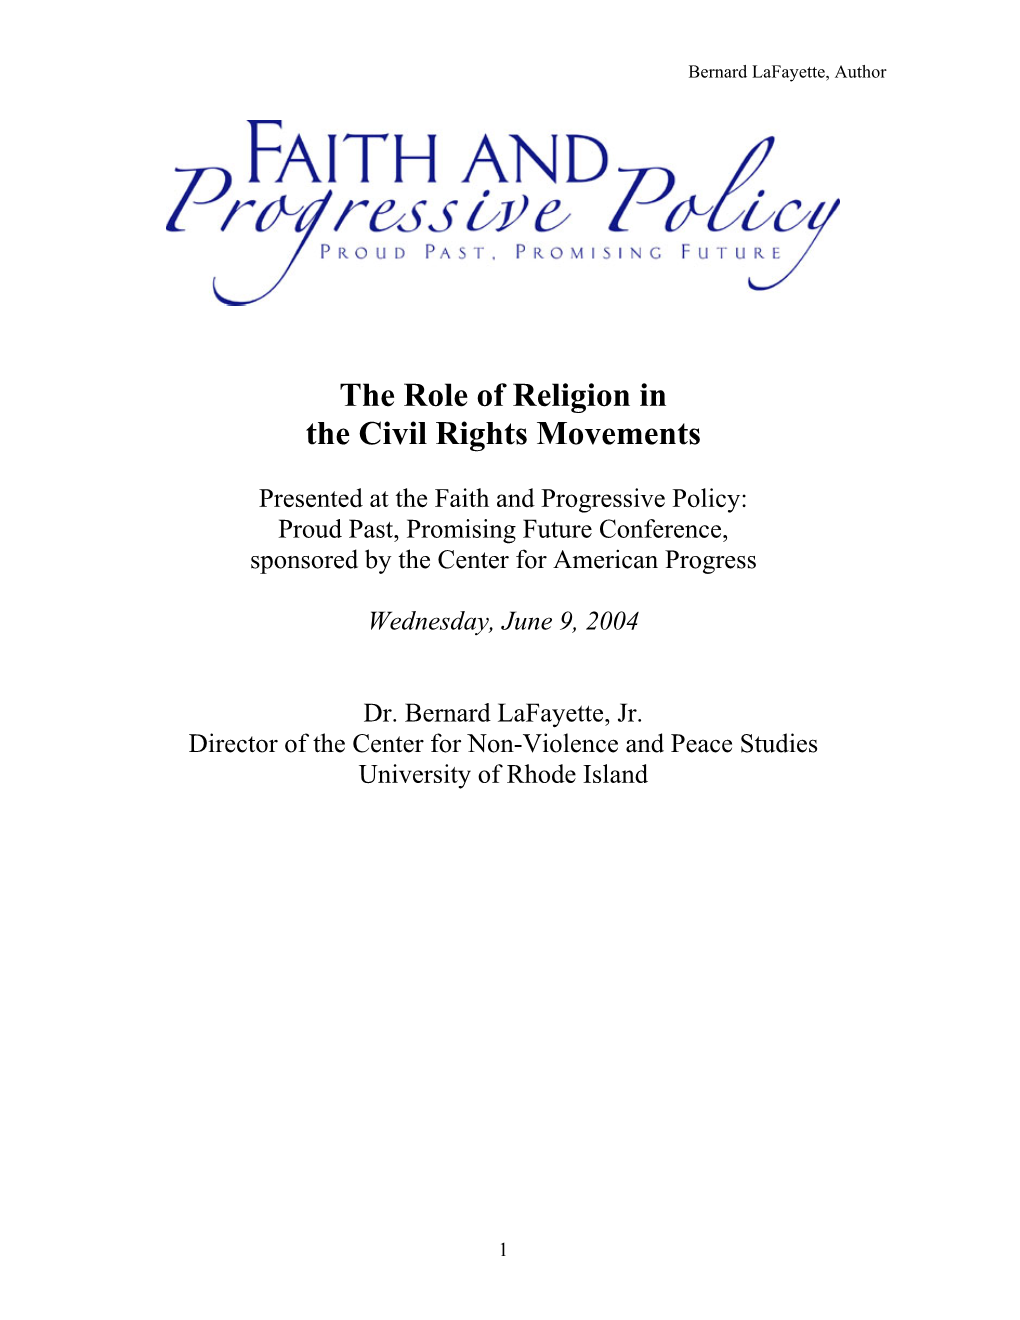 The Role of Religion in the Civil Rights Movements